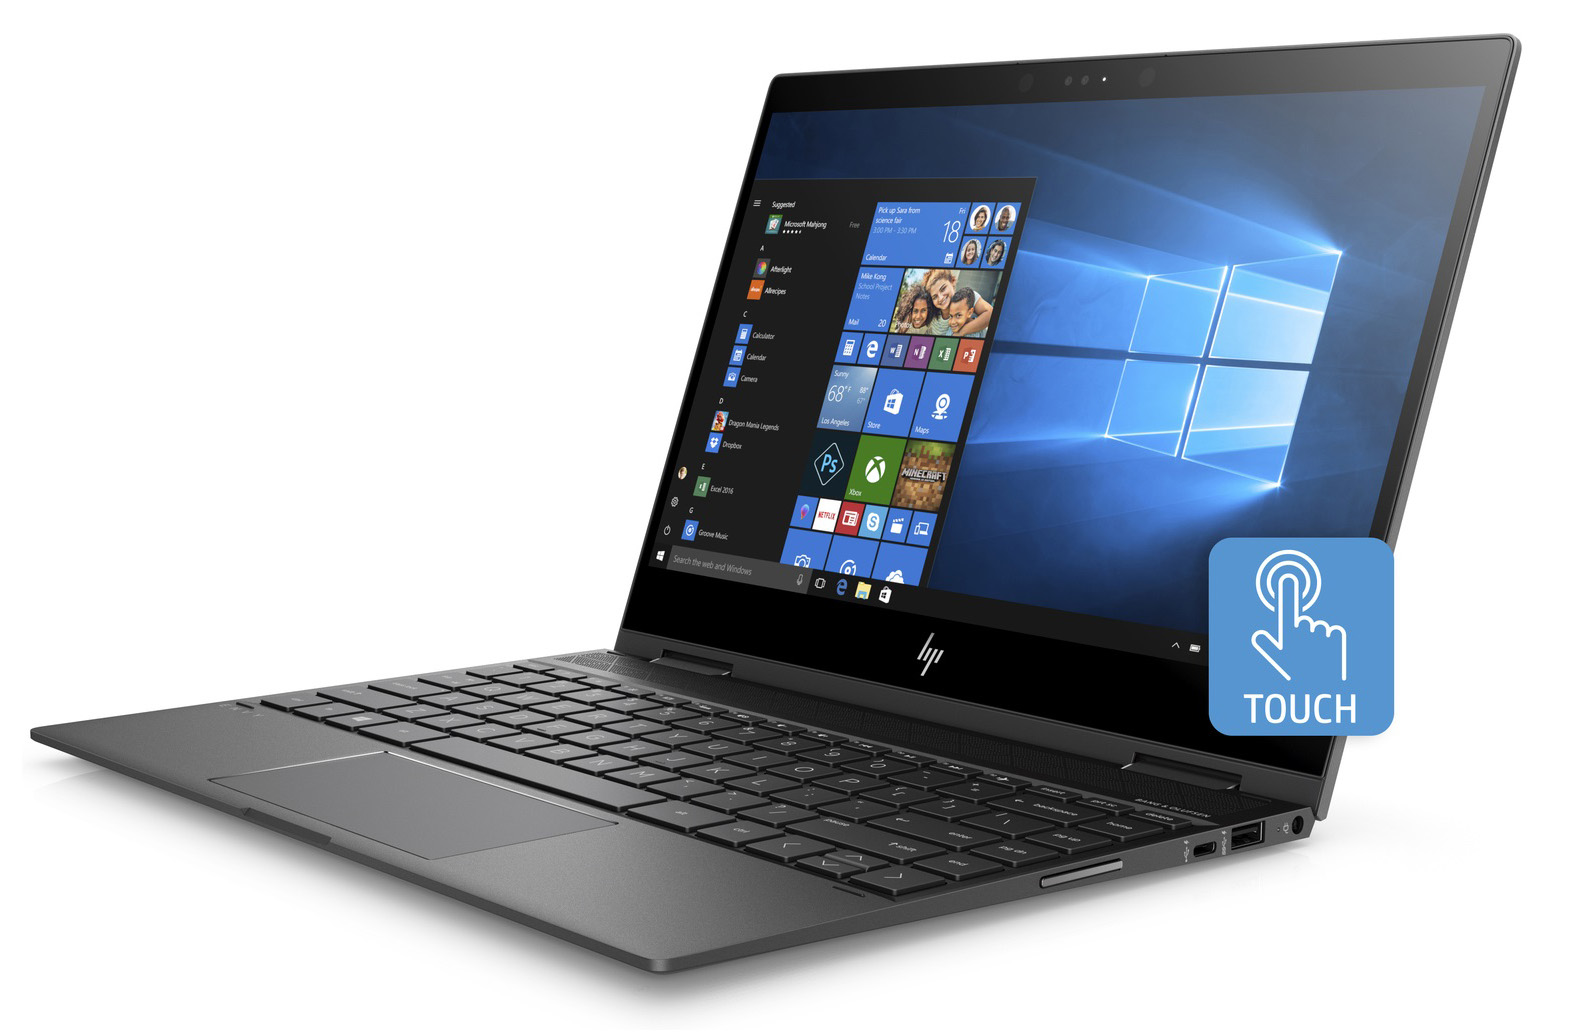 HP ENVY x360 13 (13-ag0000) - Specs, Tests, and Prices 